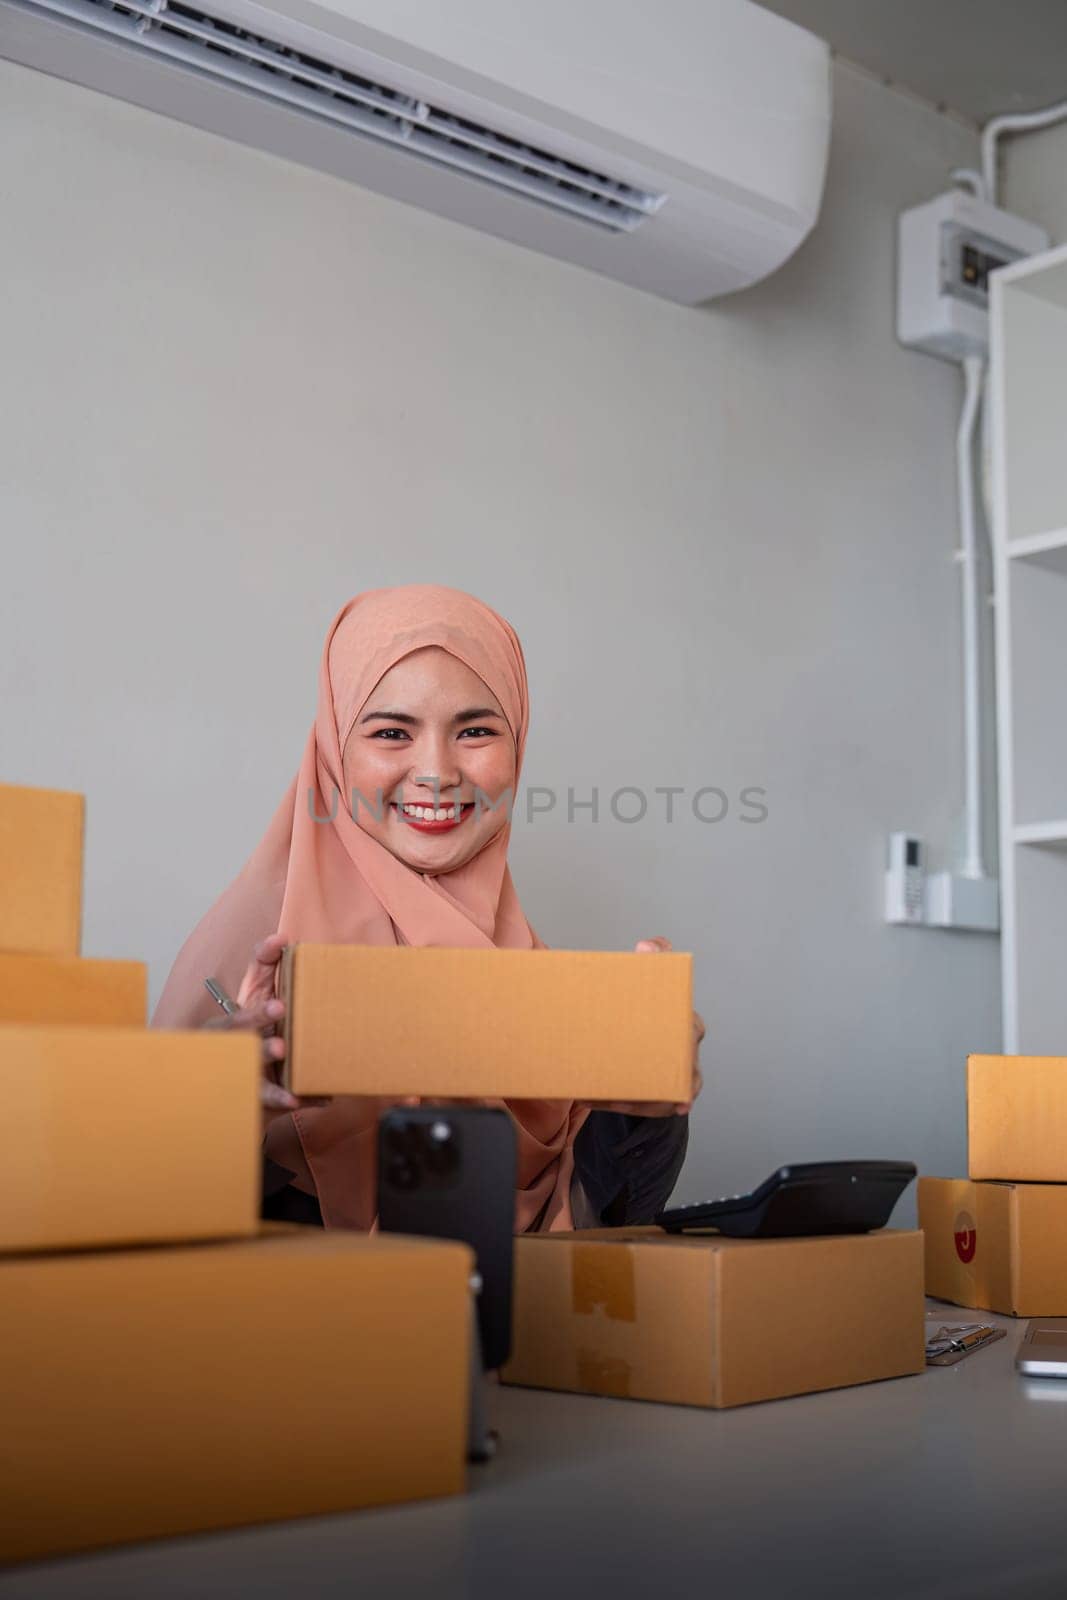 Muslim women selling online at home with box. Selling online with box to accept order from customer. SME business idea. Parcel delivery. muslim woman working smartphone and laptop at home by nateemee